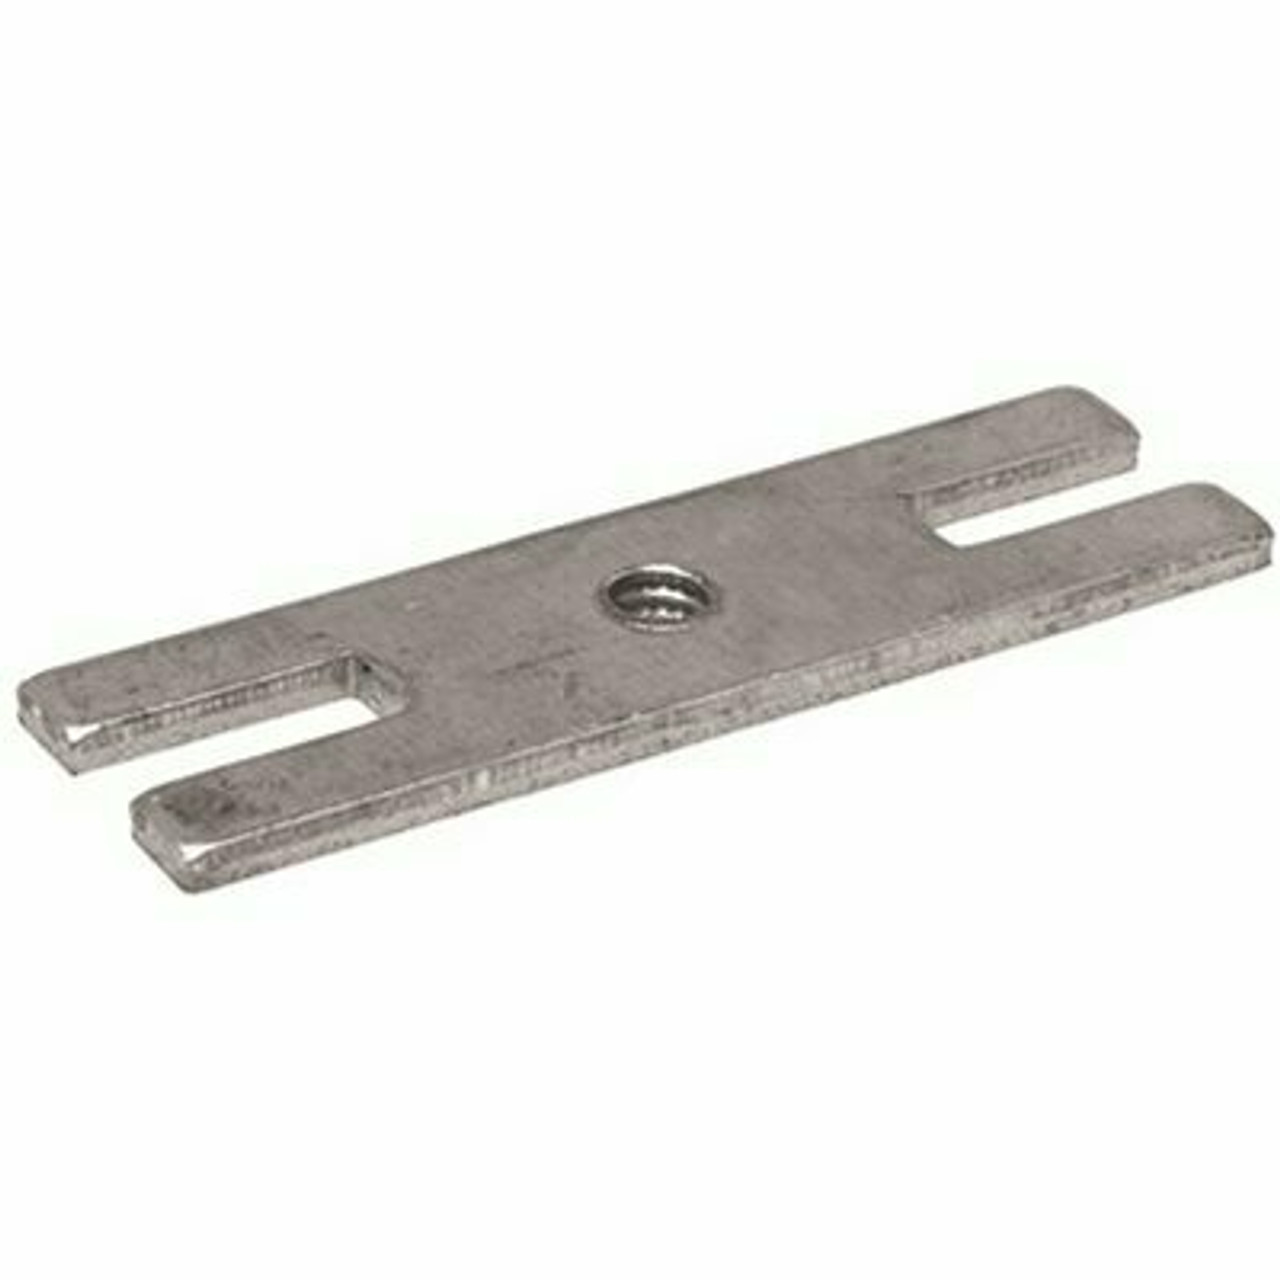 Proplus Adapter Strap For Overflow Plate, 2 Hole To 1 Hole